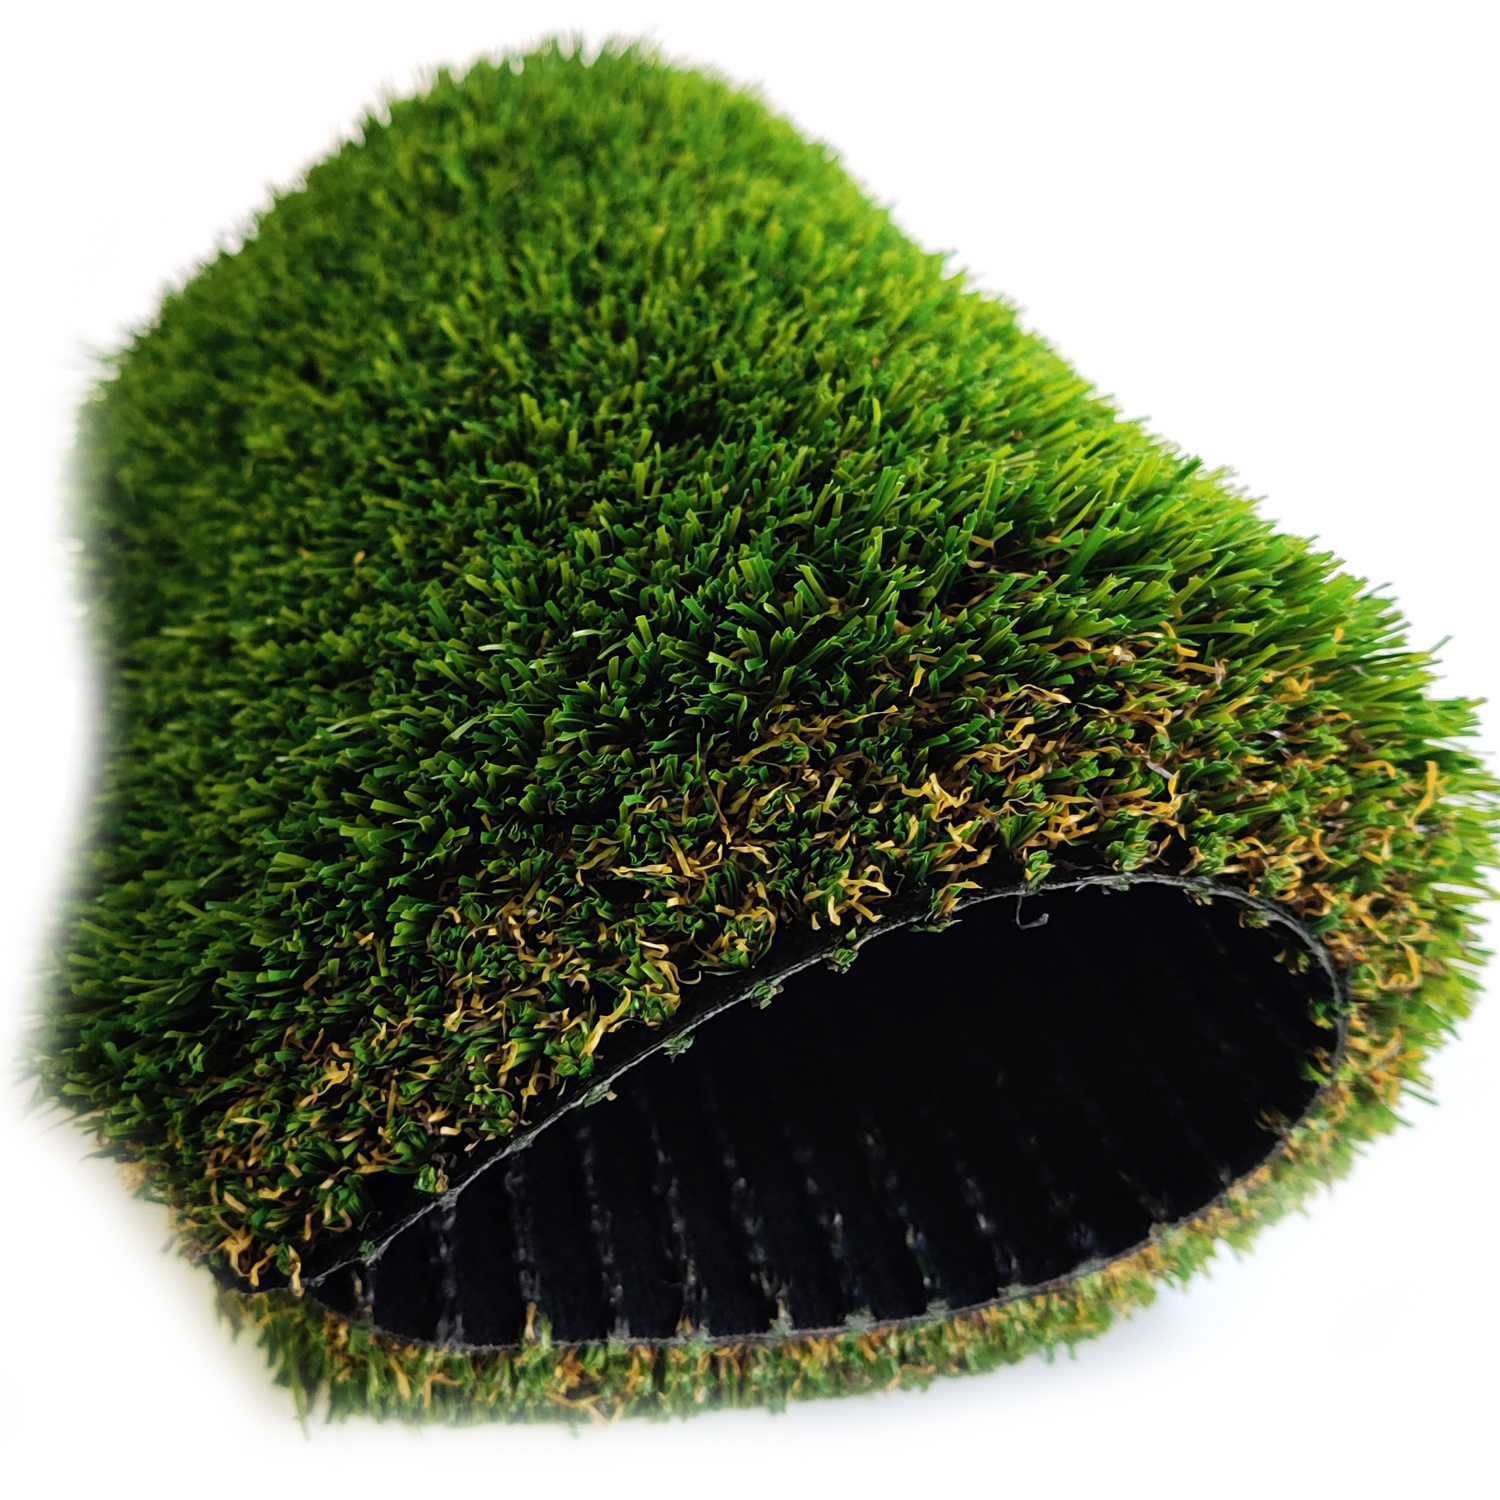 ARTIFICIAL GRASS 40MM FOR OUTDOOR USE